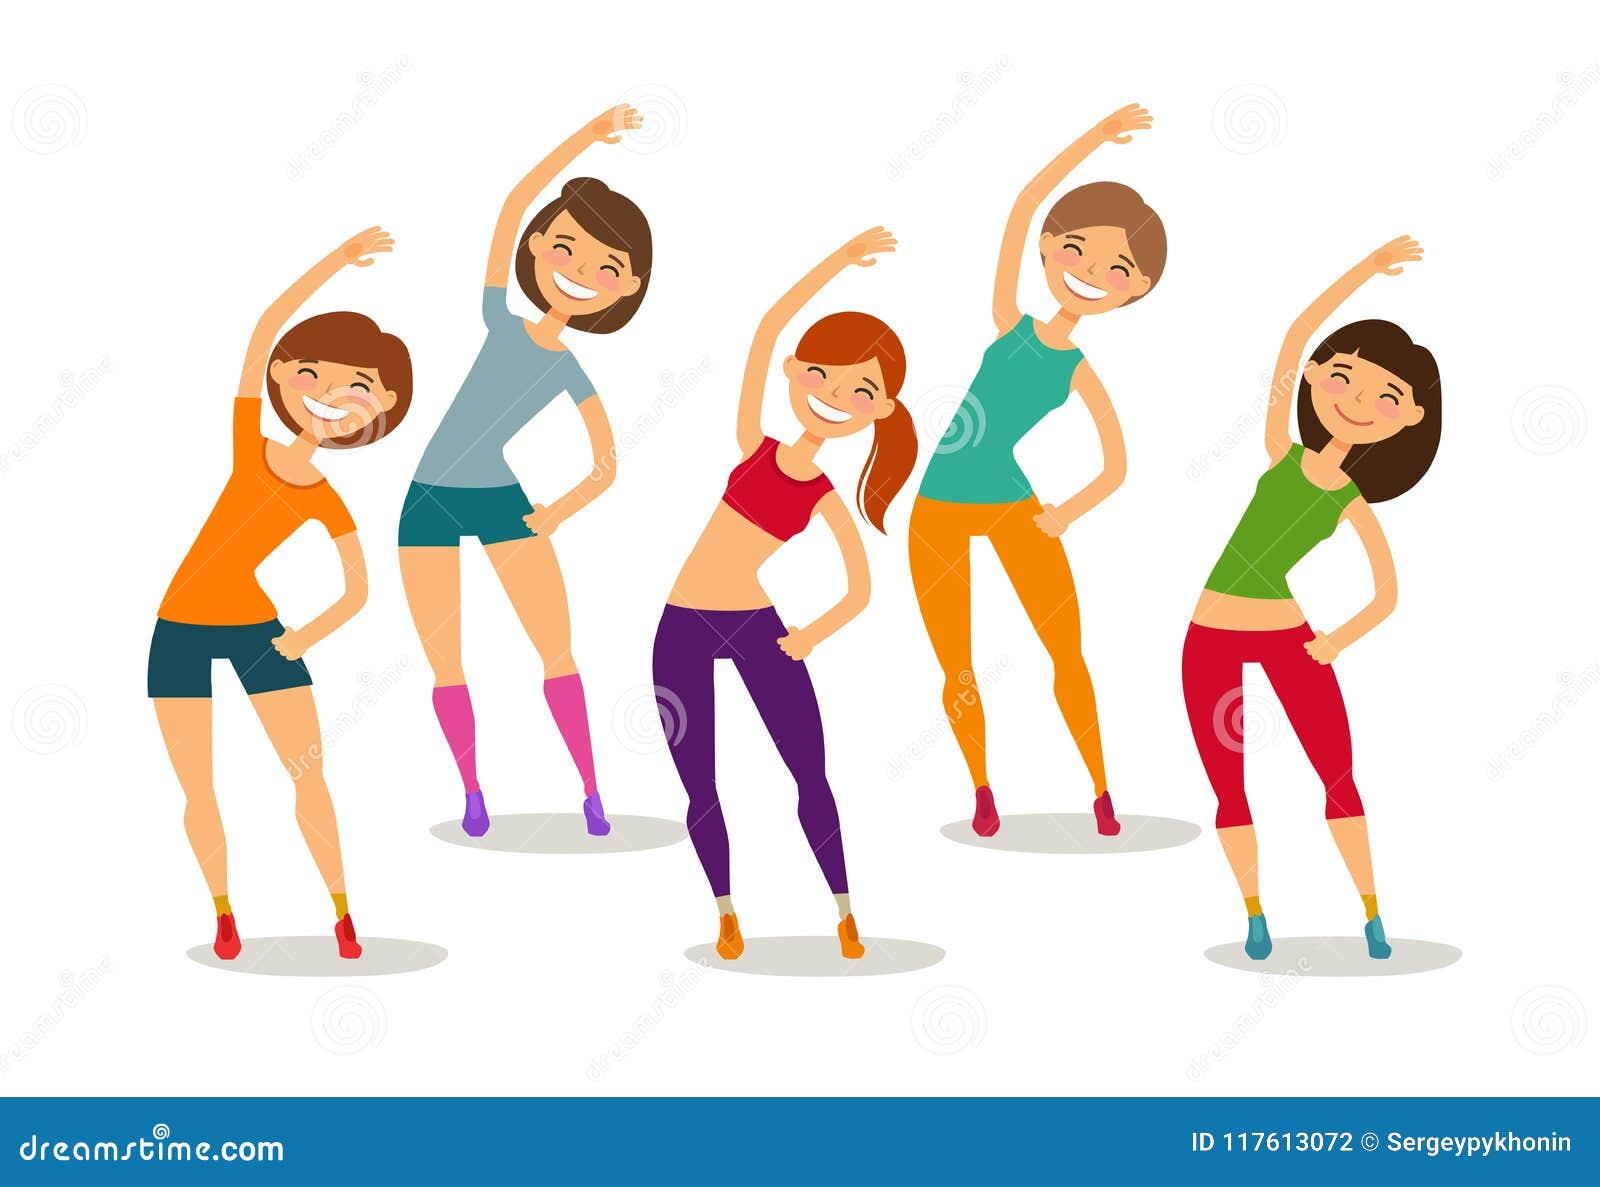 Sport, Aerobics, Healthy Lifestyle Concept. Group of People Engaged Fitness  in Gym. Funny Cartoon Vector Illustration Stock Vector - Illustration of  healthy, engaged: 117613072